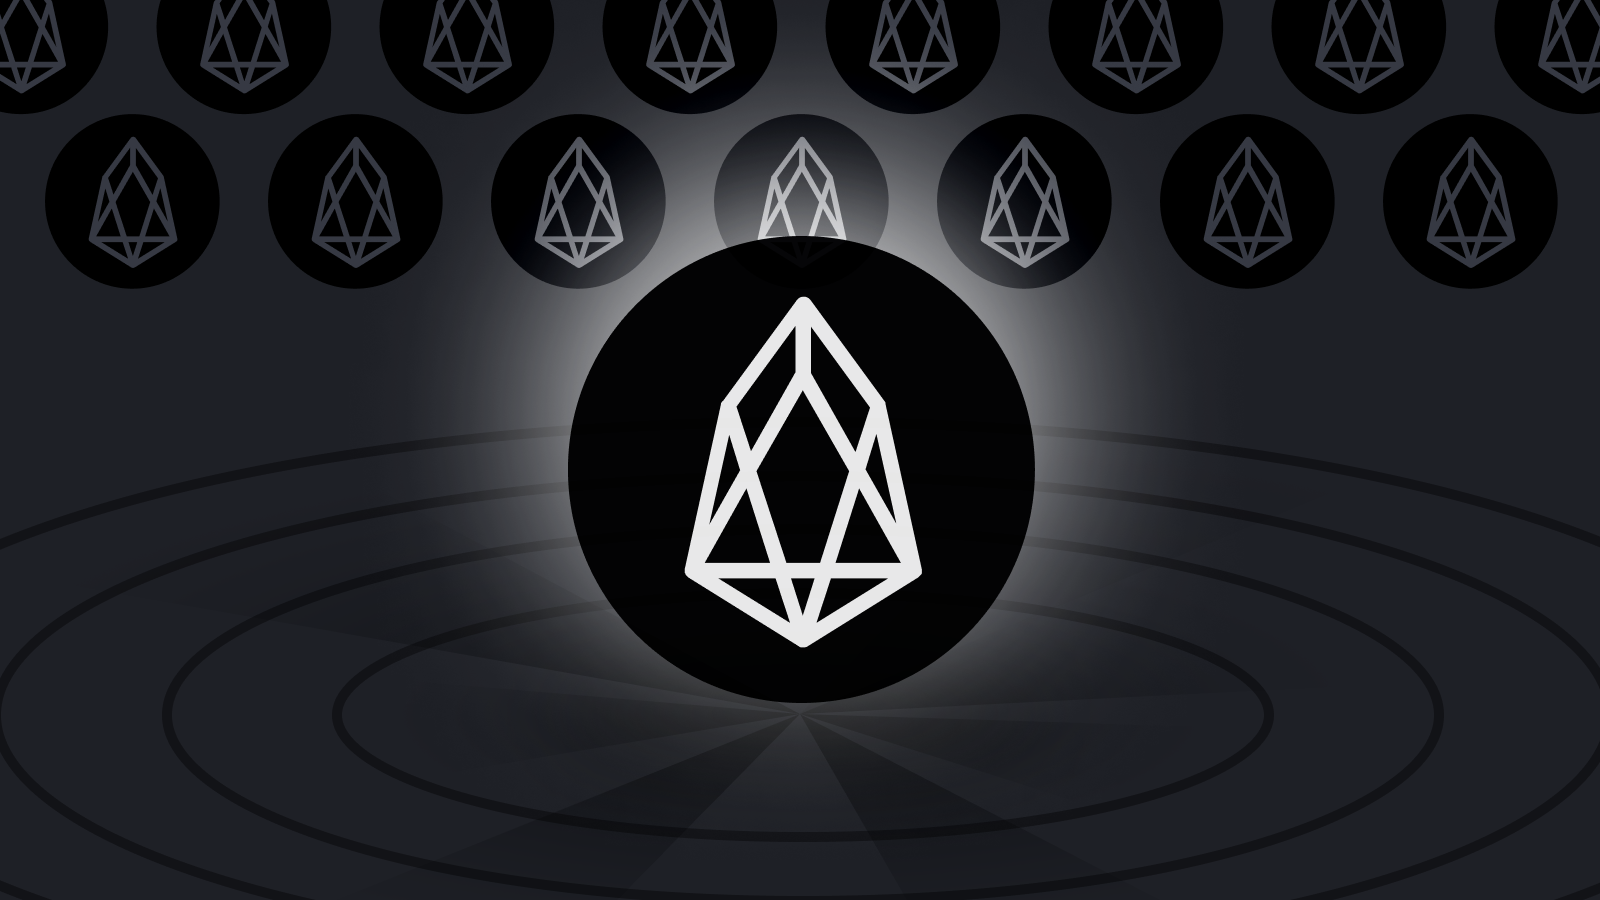 EOS Network - Home